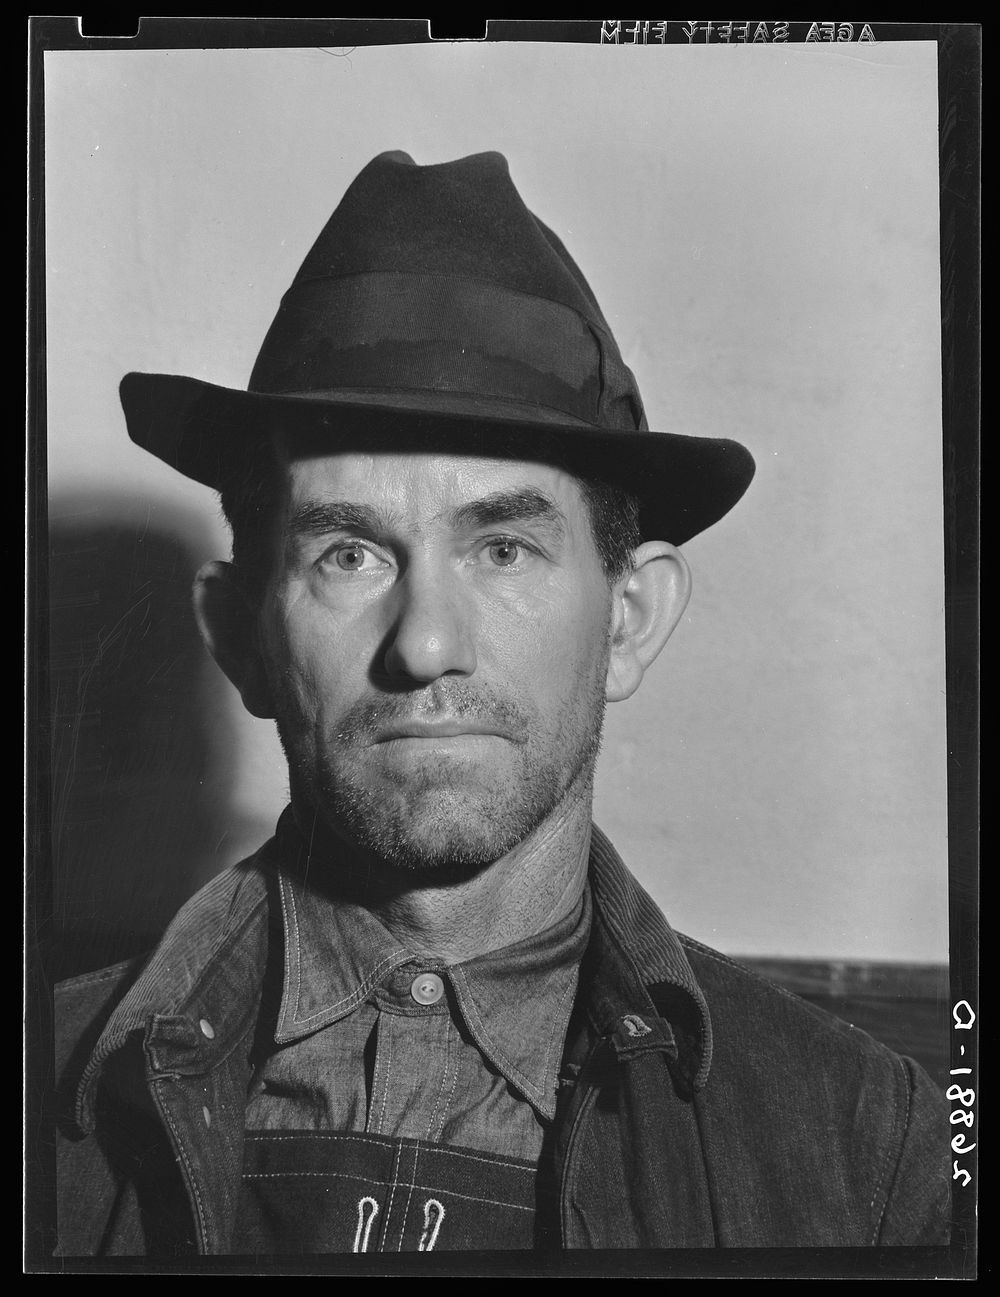 Unemployed miner, Herrin, Illinois. General caption: Williamson County, Illinois, once produced 11,000,000 tons of coal per…